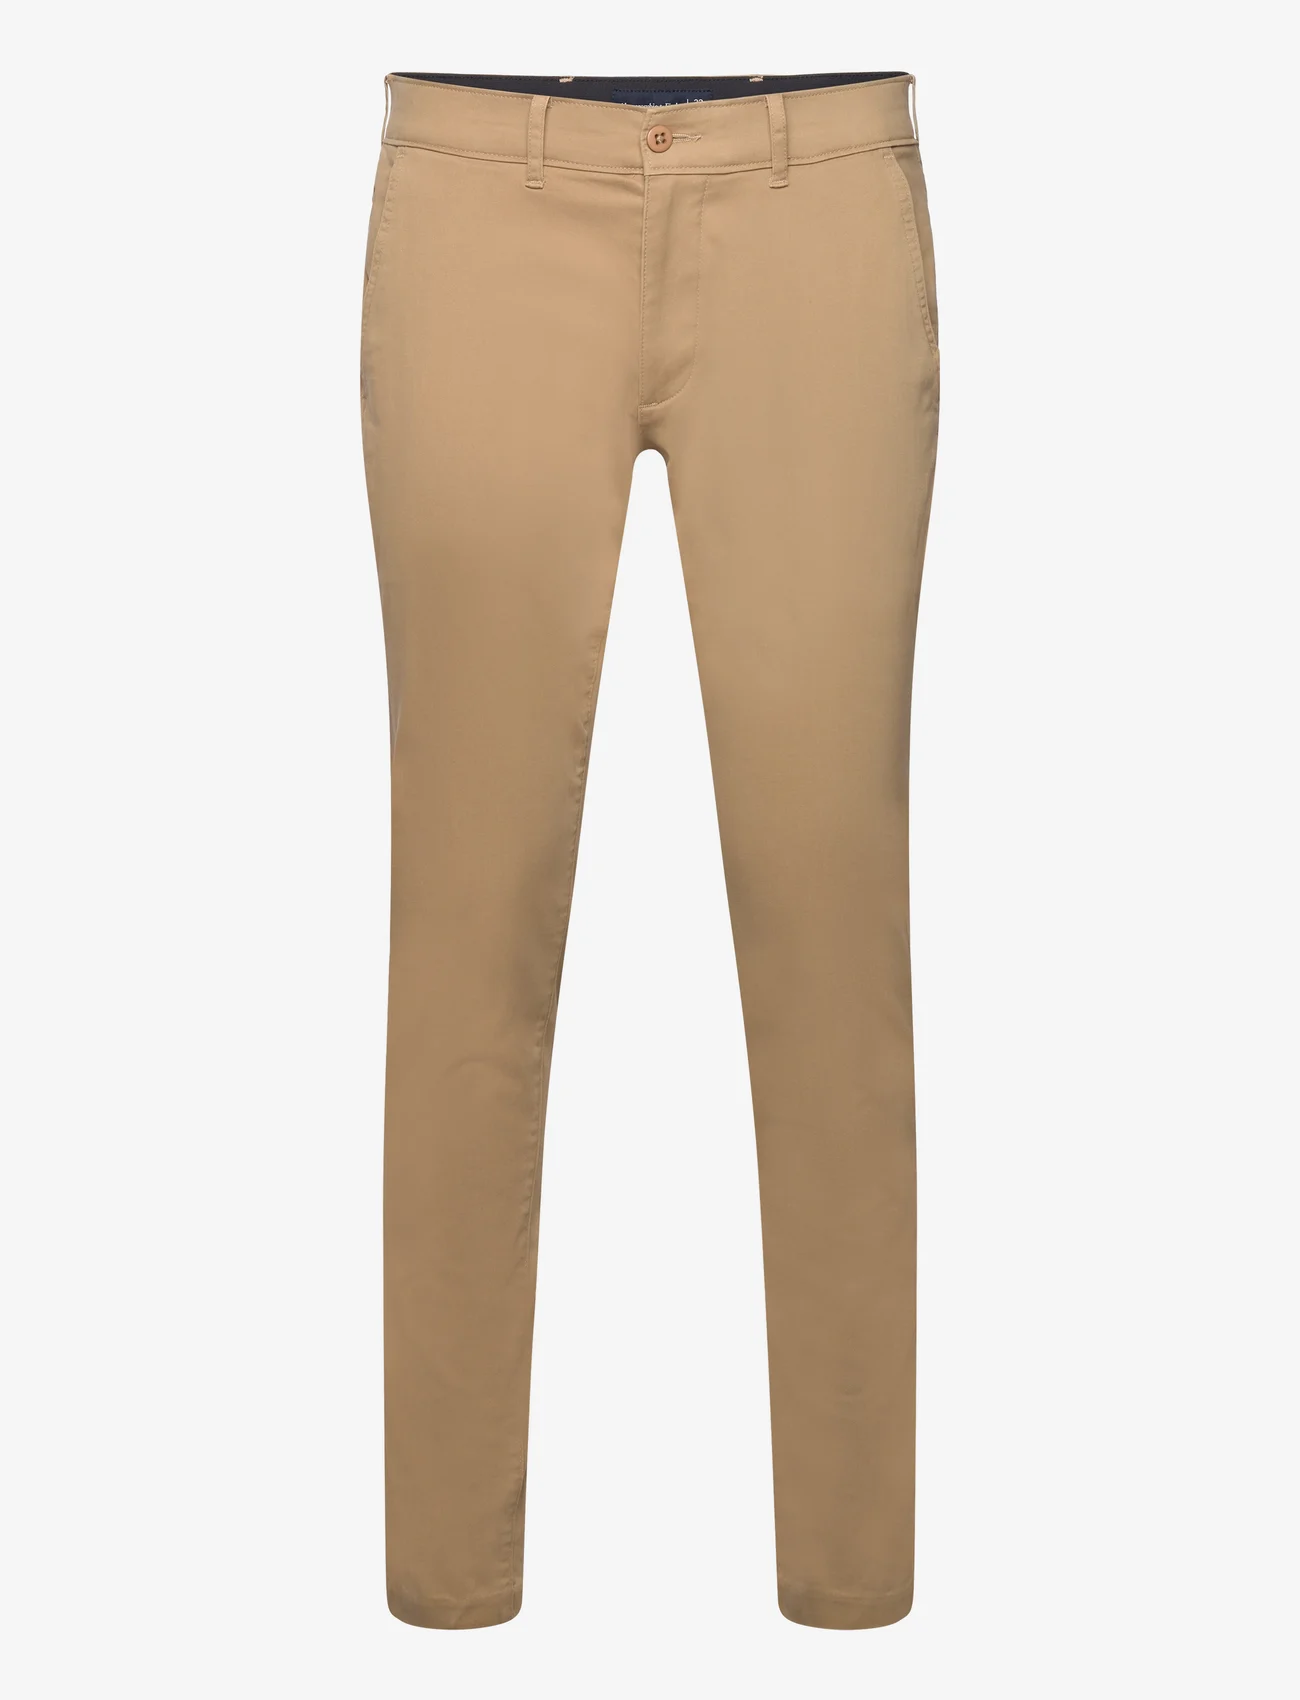 Abercrombie & Fitch - ANF MENS PANTS - chino's - kelp 475 - 0